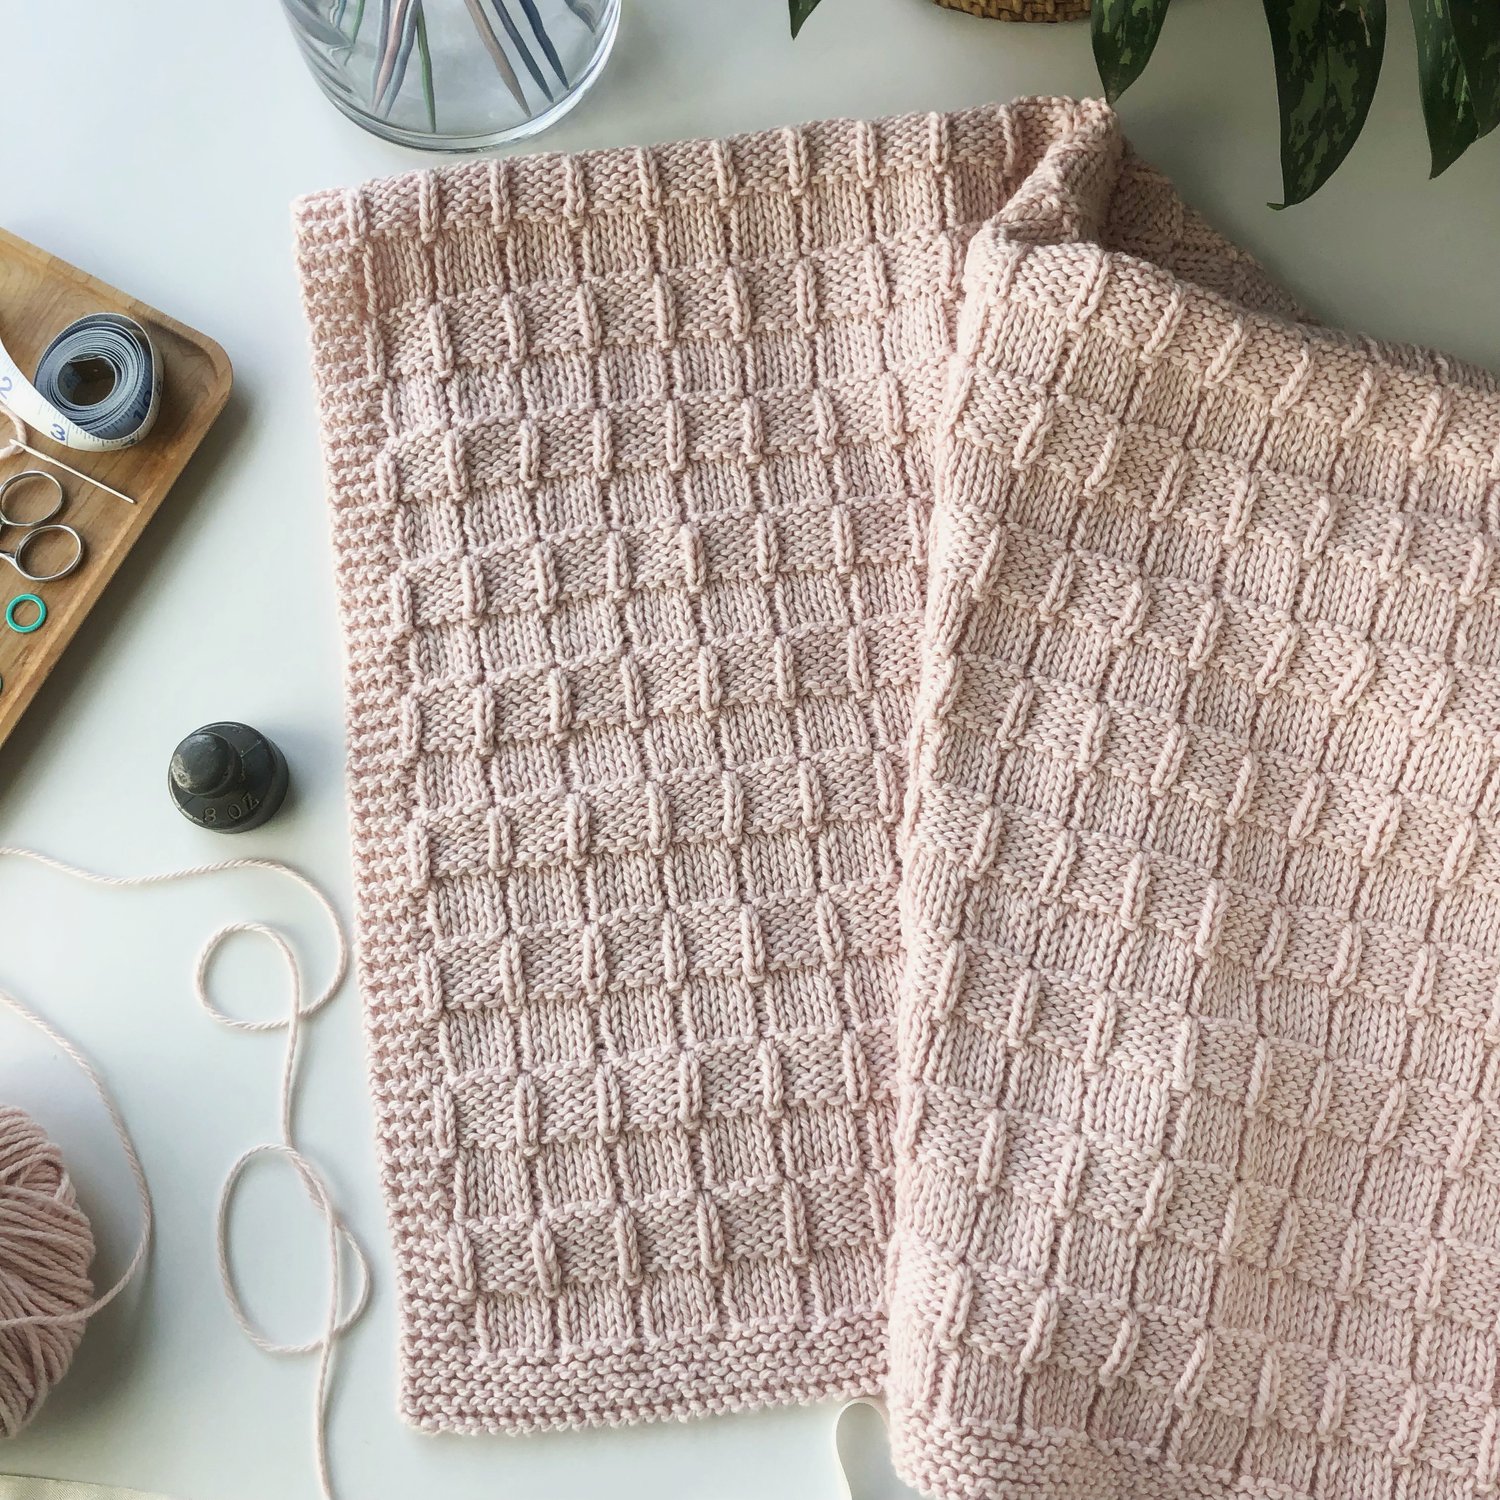 Modern Reversible Blanket Knitting Pattern - Easy to Knit with